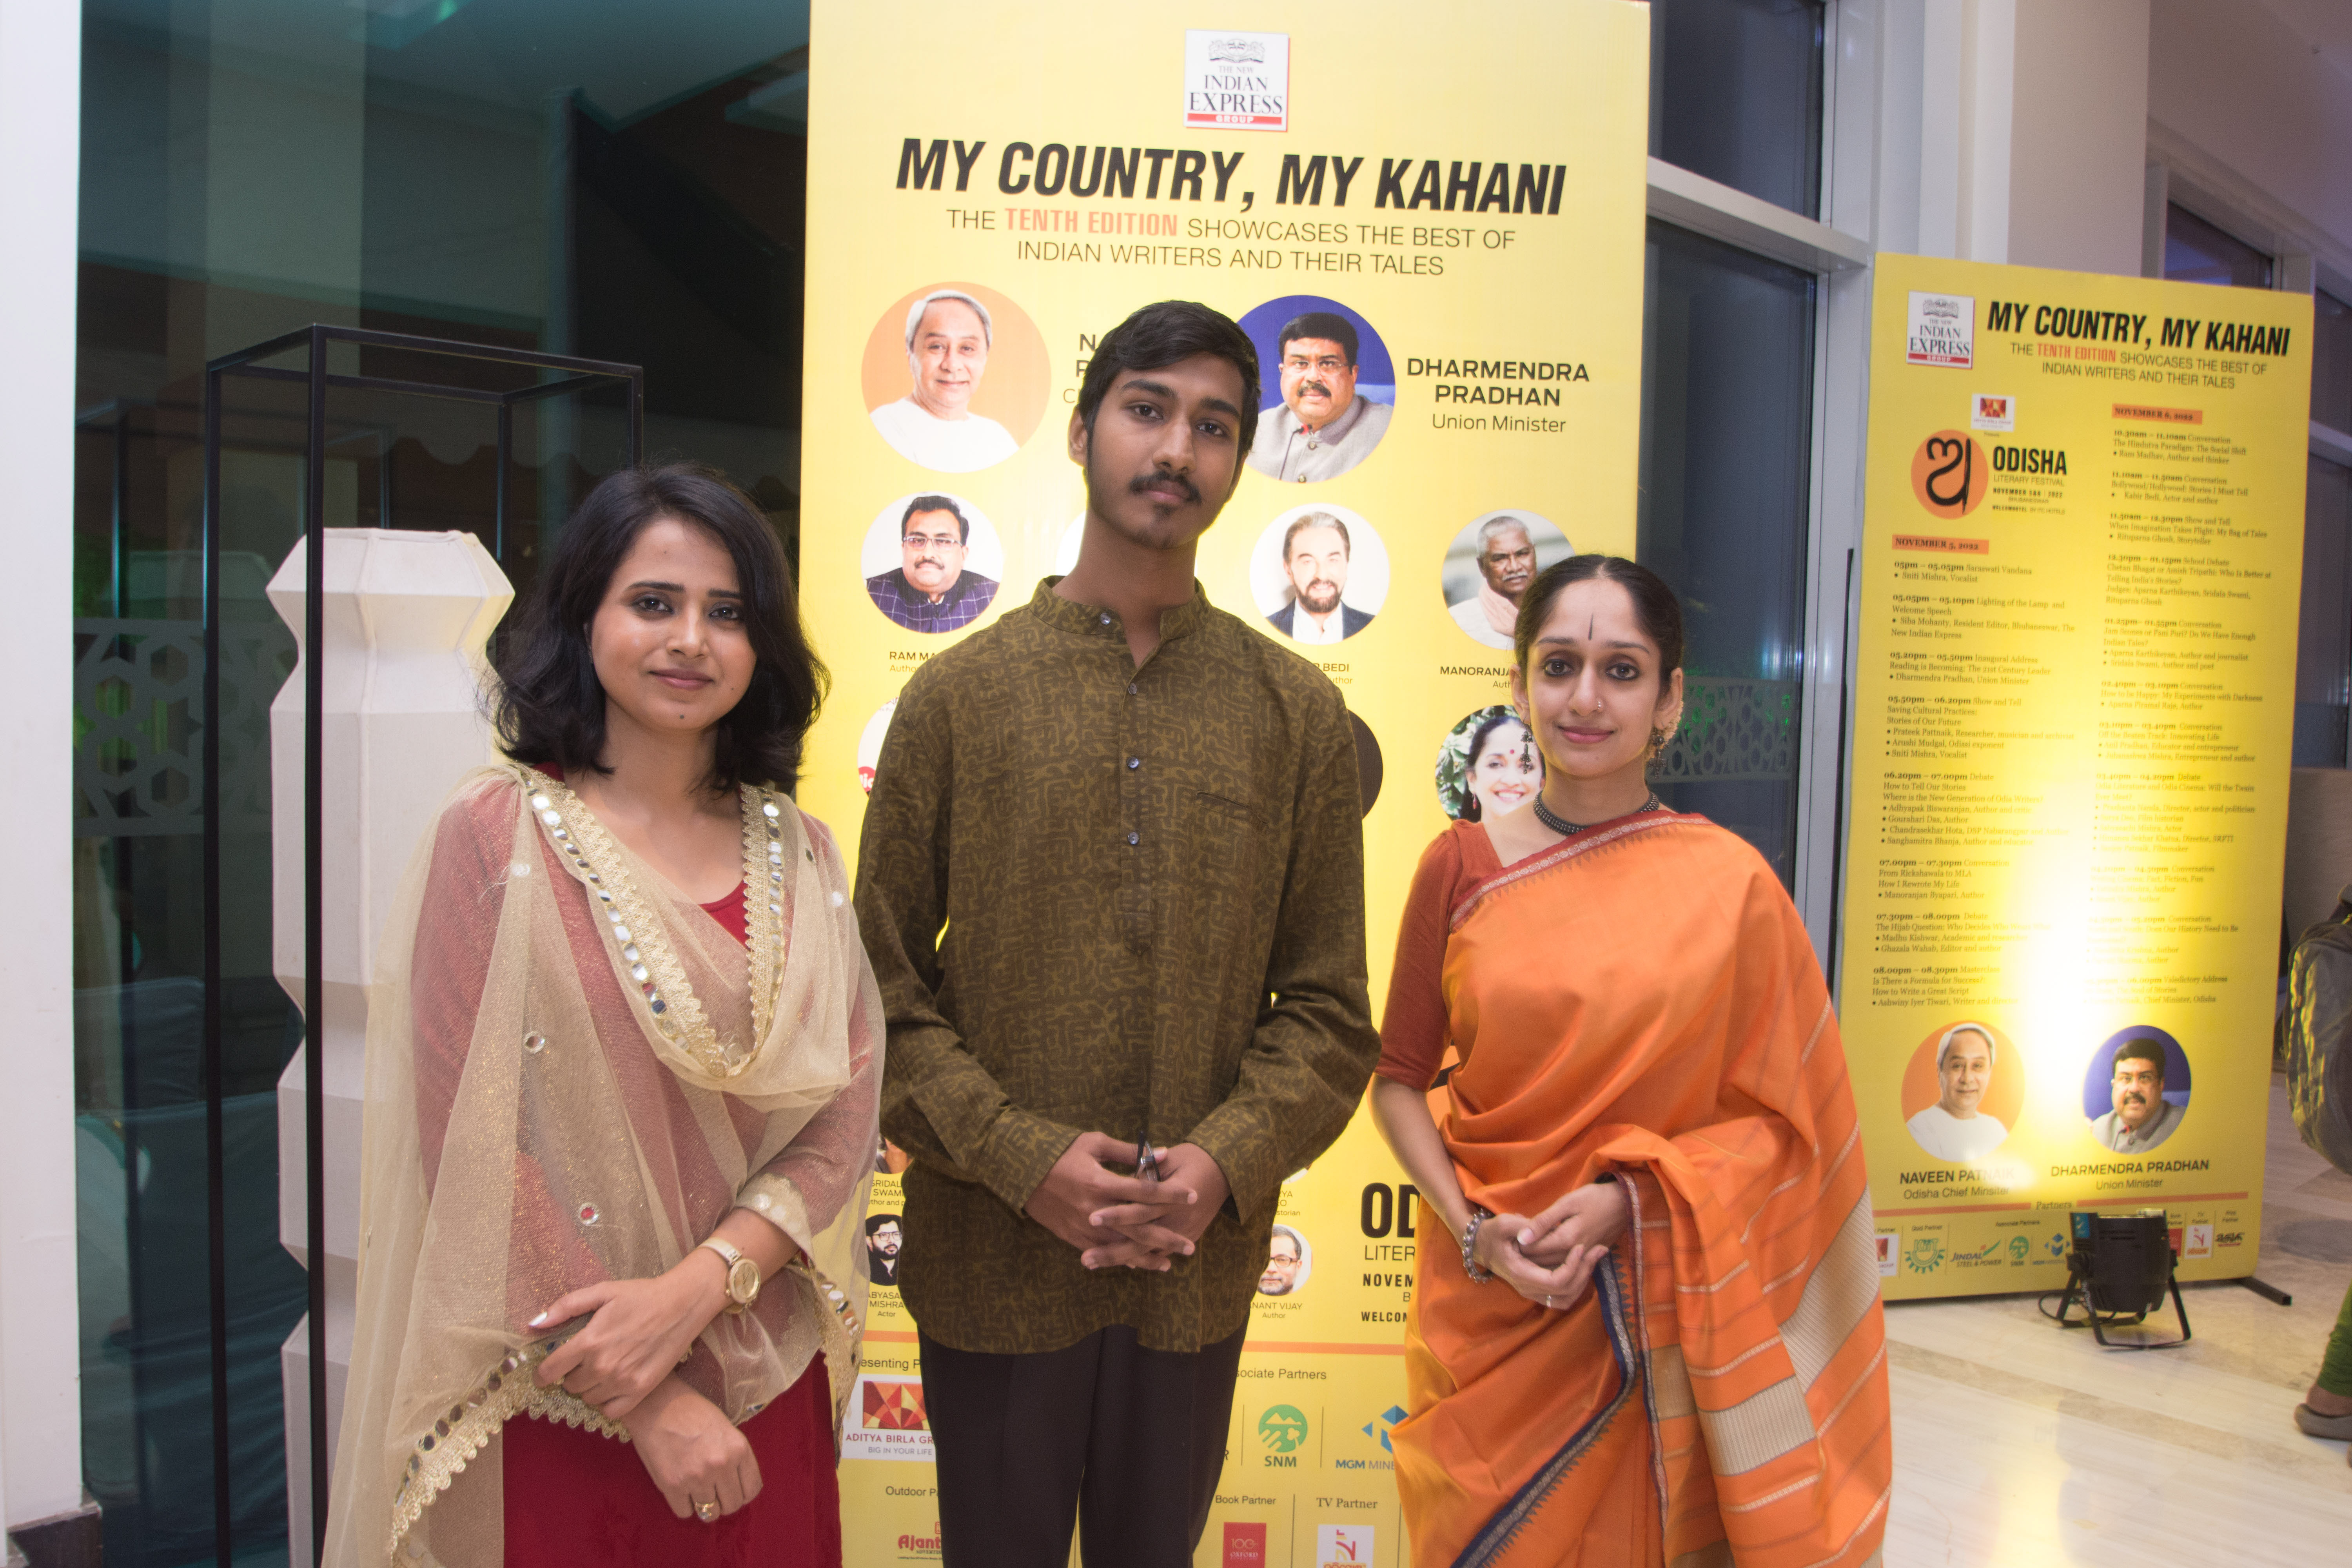 From left to right - Sniti Mishra, Vocalist, Prateek Pattnaik, Researcher, musician and archivist, and Arushi Mudgal, Odissi exponent spoke in the first session - Saving Cultural Practices: Stories of Our Future, on the first day of Odisha Literary Festival in Bhubaneswar - Express / DEBADATTA MALLICK